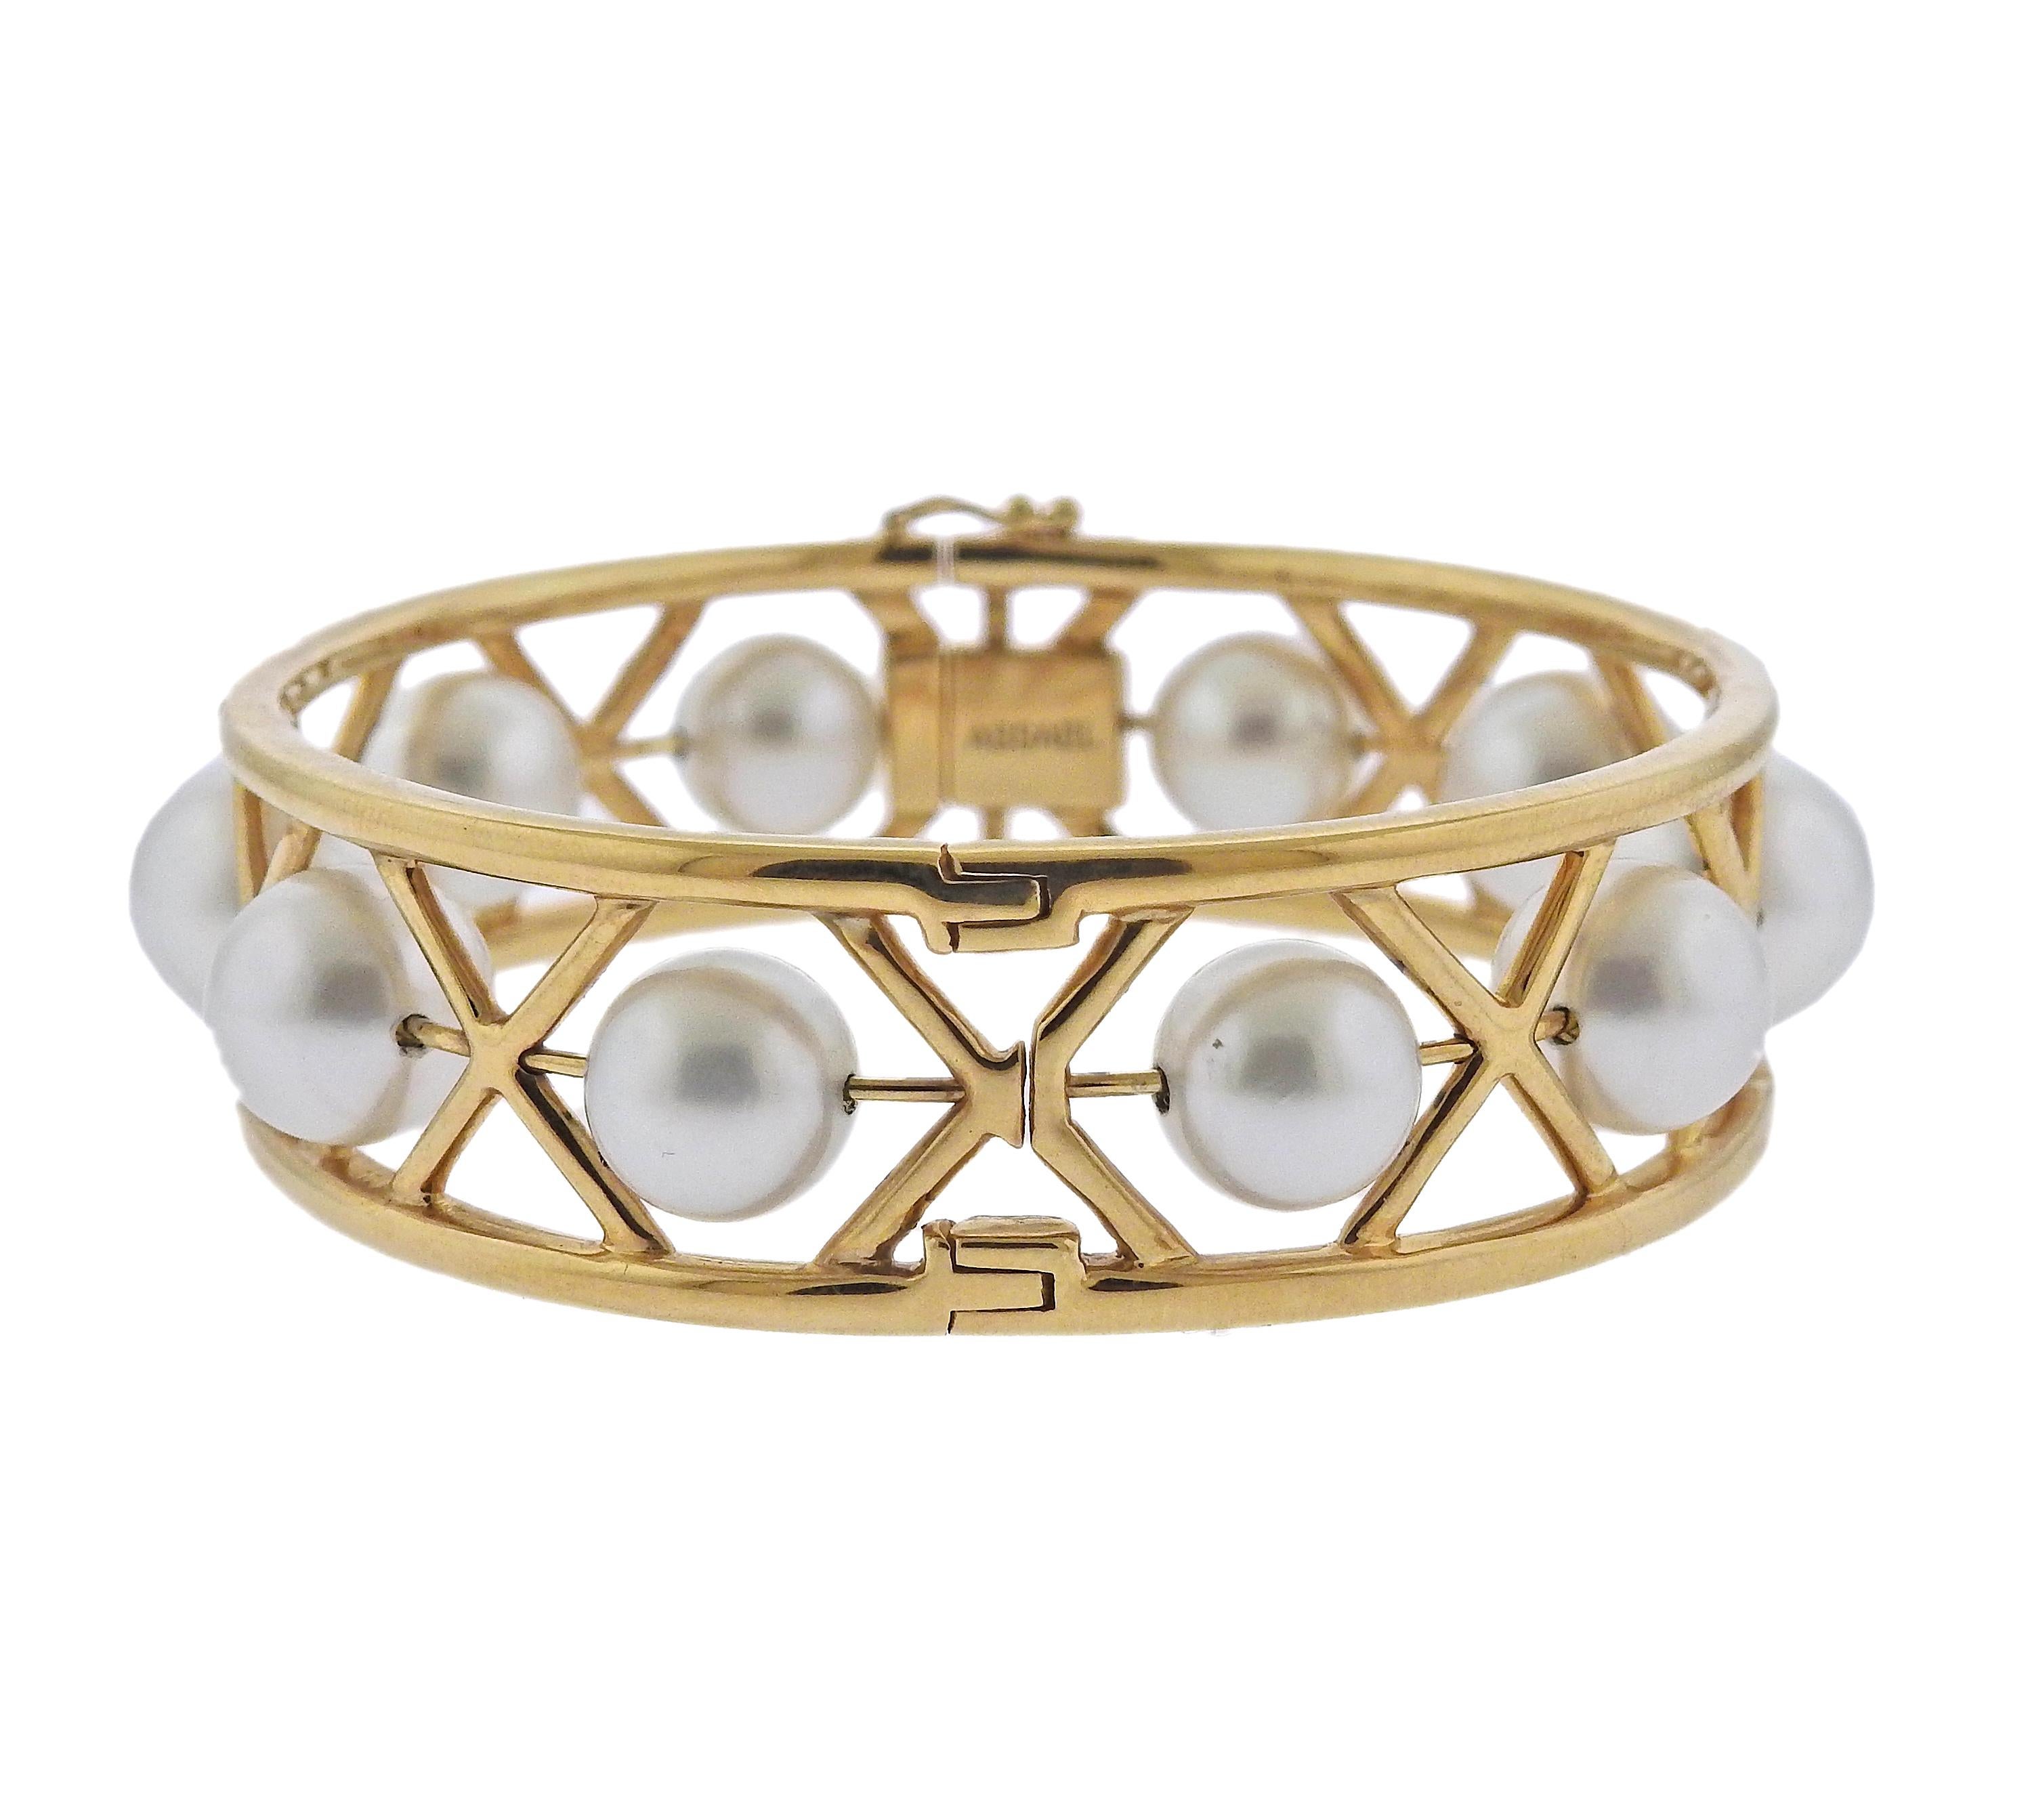 Assael 18k gold bangle bracelet with 10-12mm South Sea pearls. New without tags, retail $18800. Bracelet will fit approx. 7